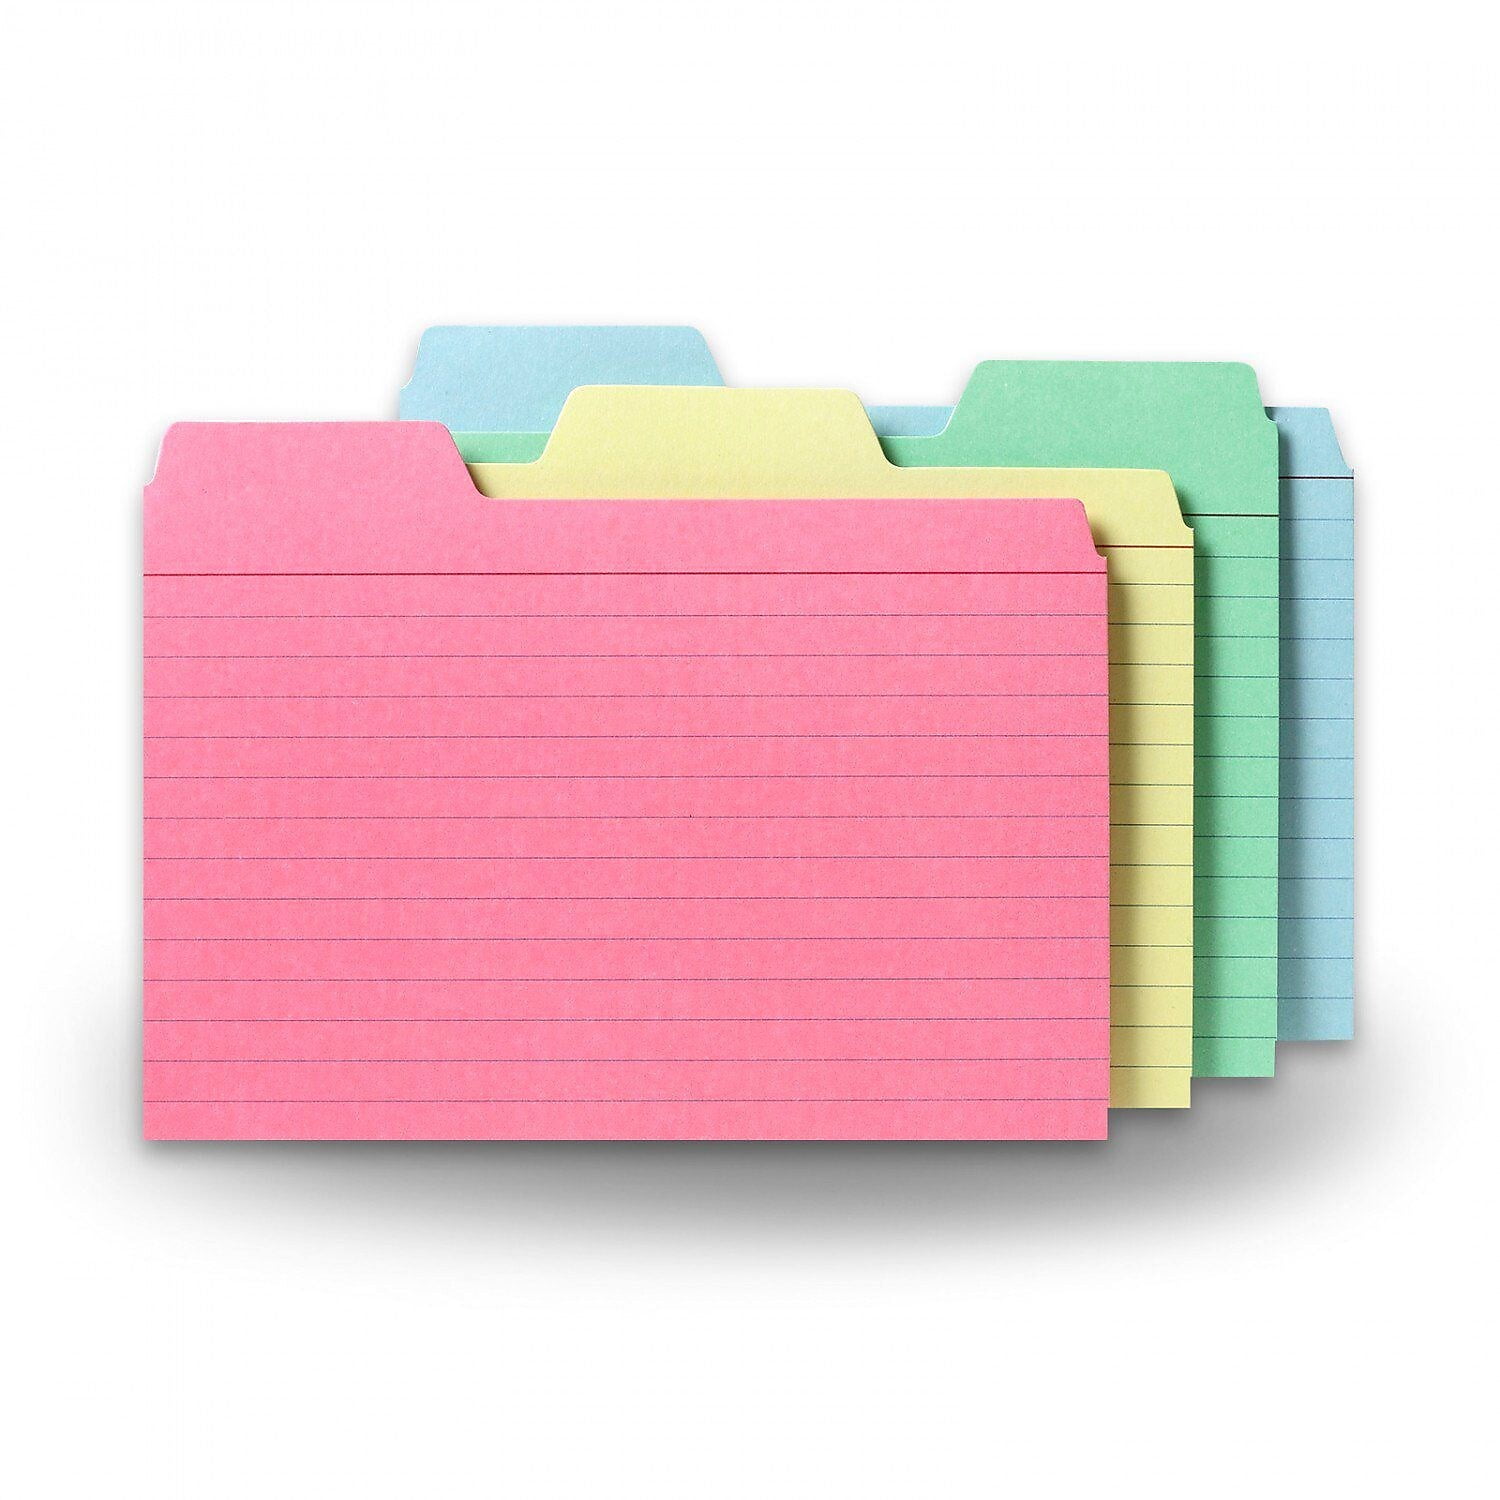 Find It Tabbed Index Cards 4x 6 48/Pack Assorted Colors (FT07218)